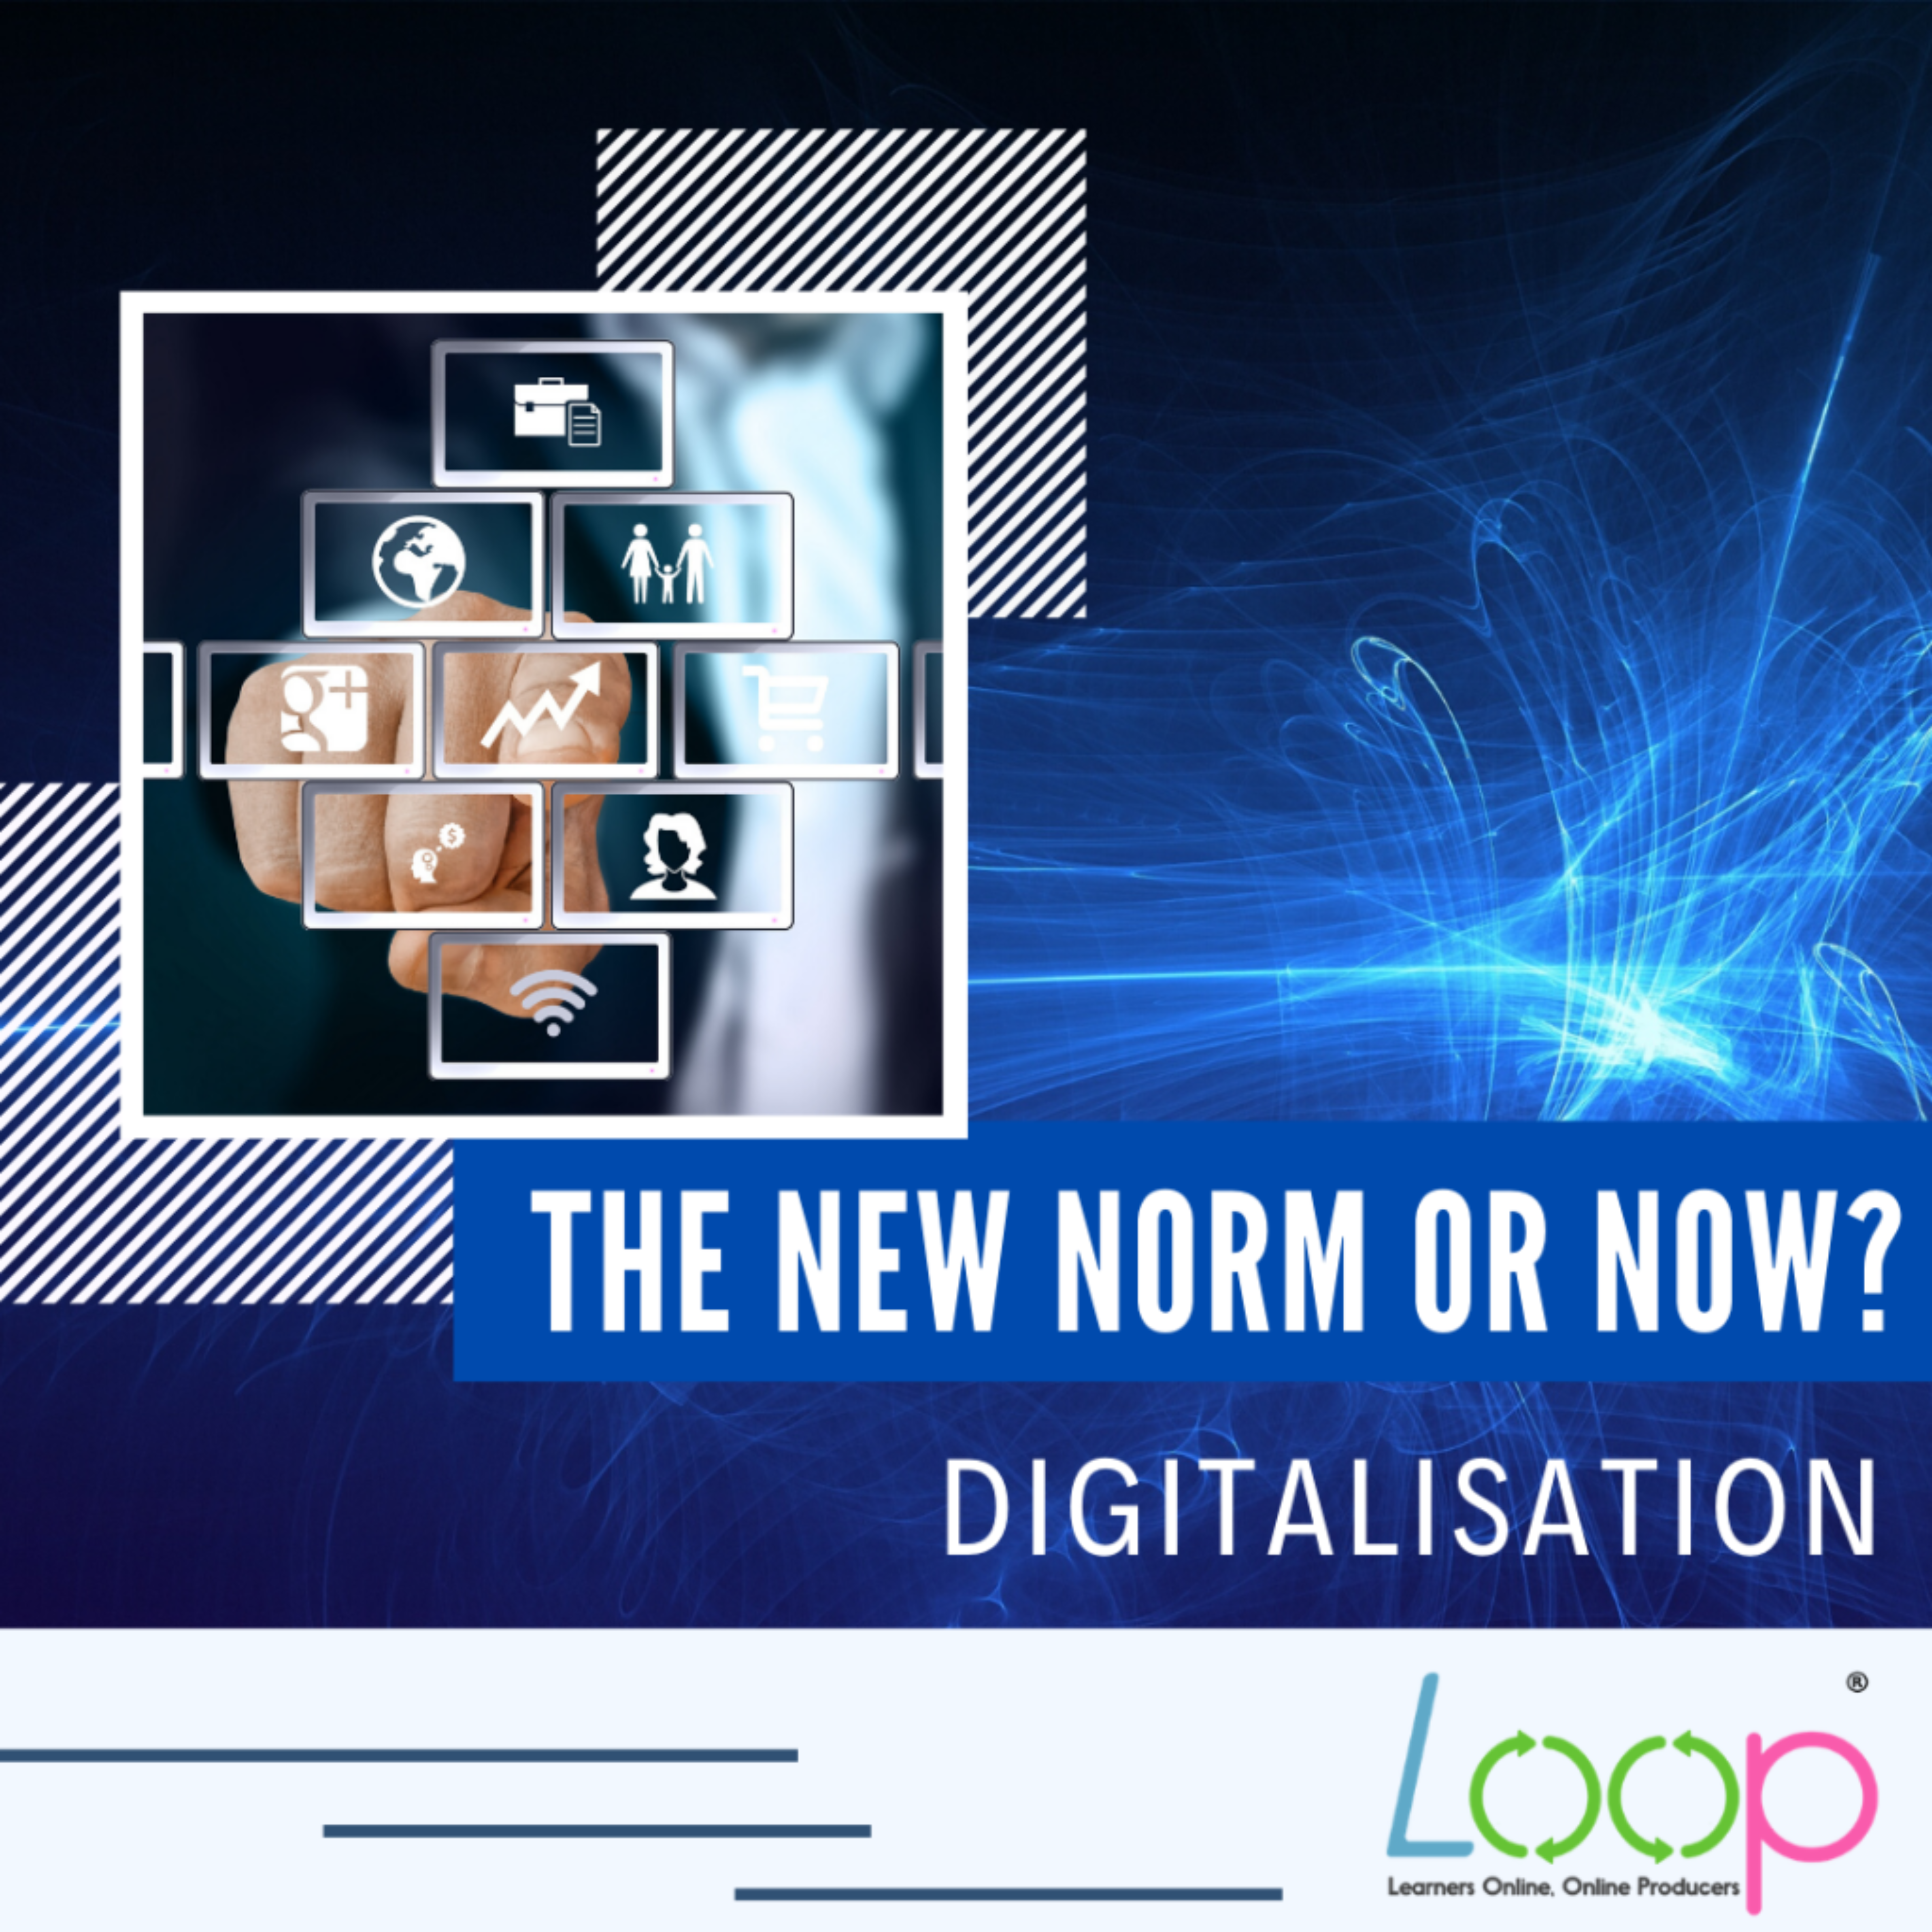 DIGITALISATION – THE NEW NORM OR NOW?